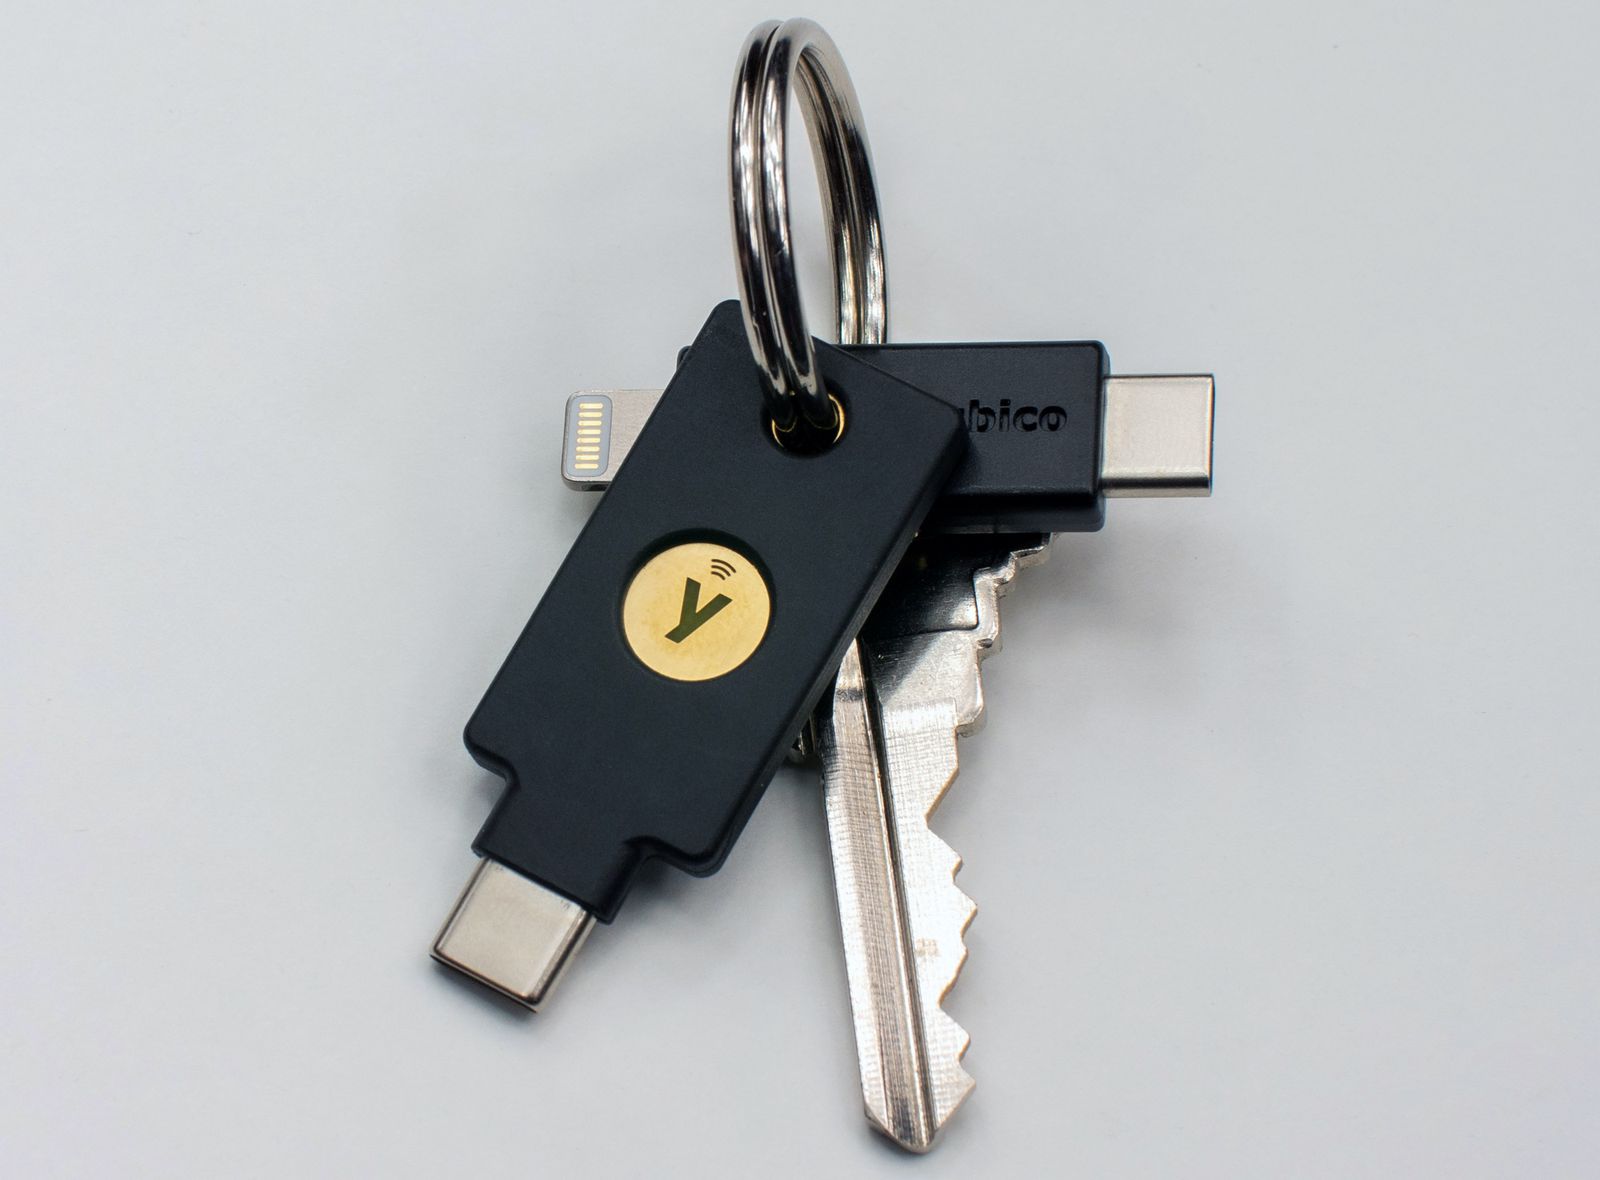 New YubiKey 5C NFC Security Key Brings NFC, USB-C Connections - SecurityWeek